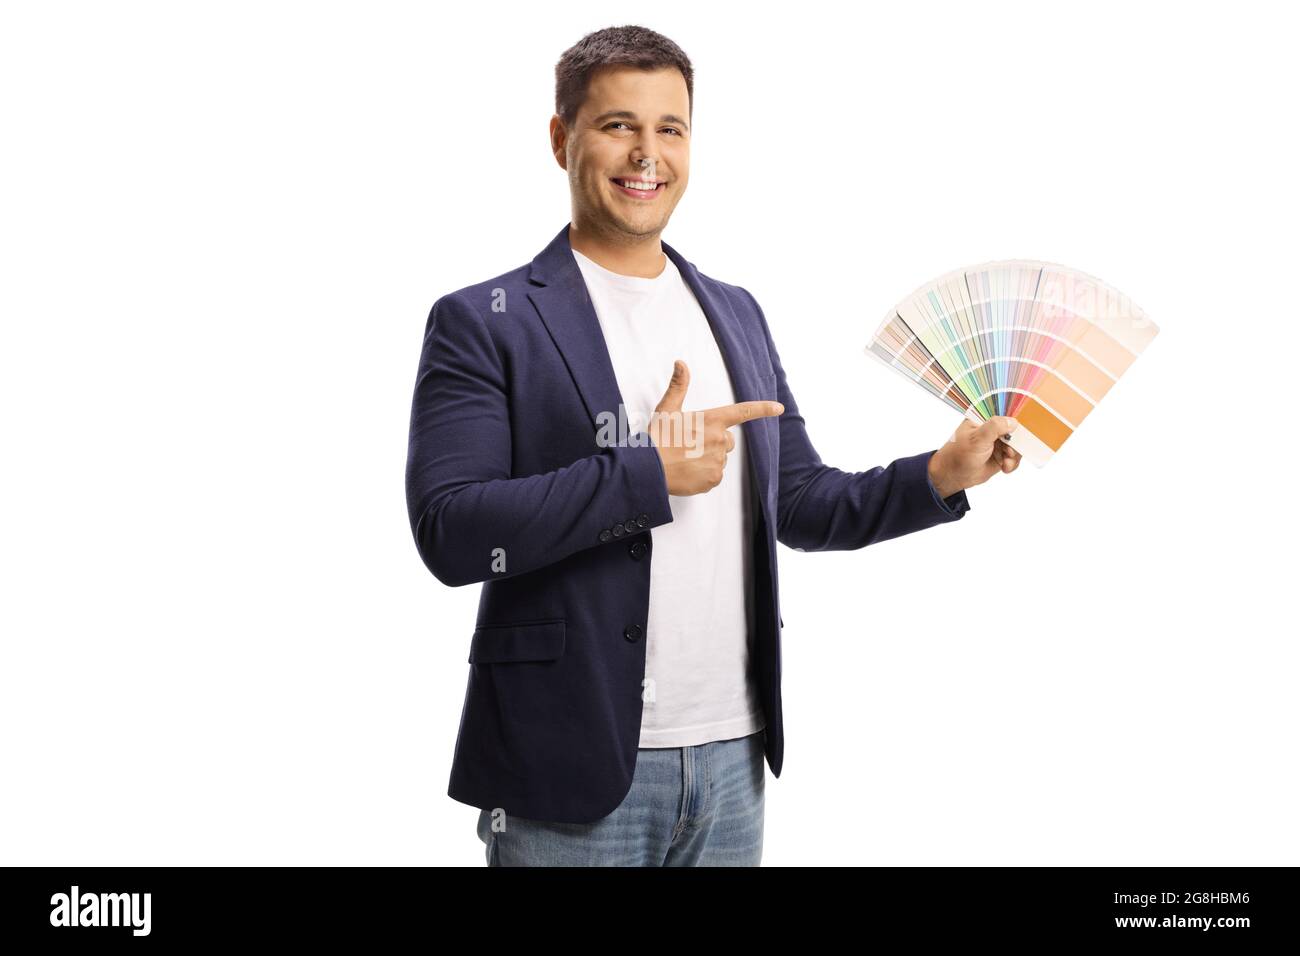 Smiling young man holding a color swatch chart and pointing isolated on white background Stock Photo